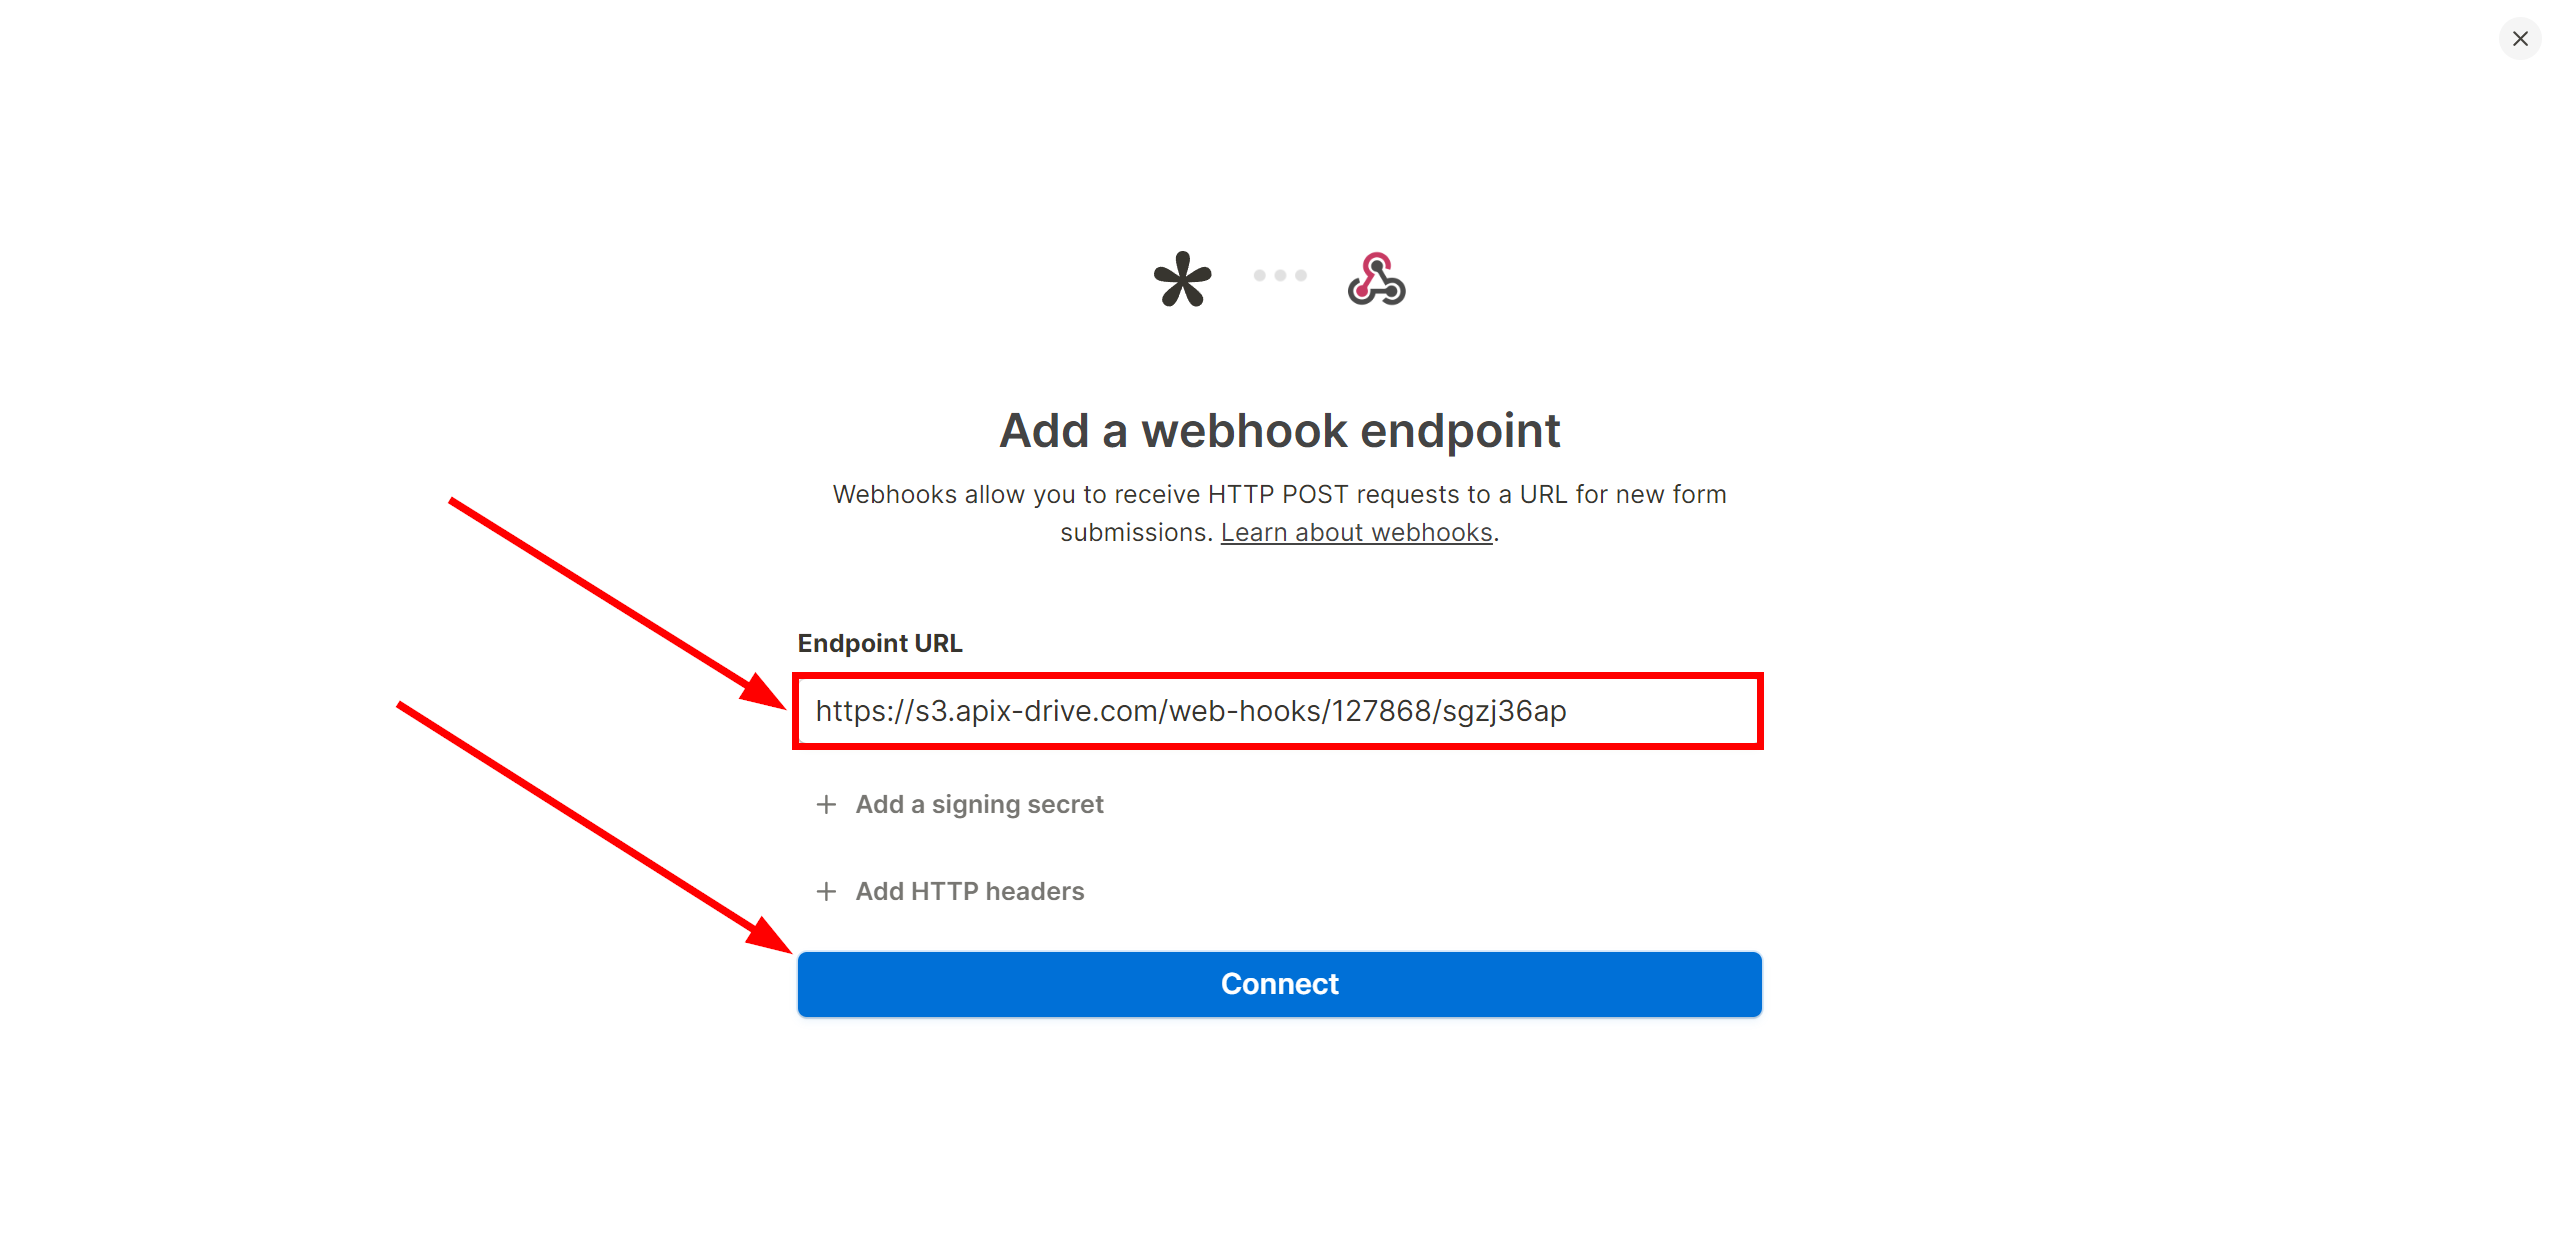 How to Connect Tally as Data Source | Webhook Setup